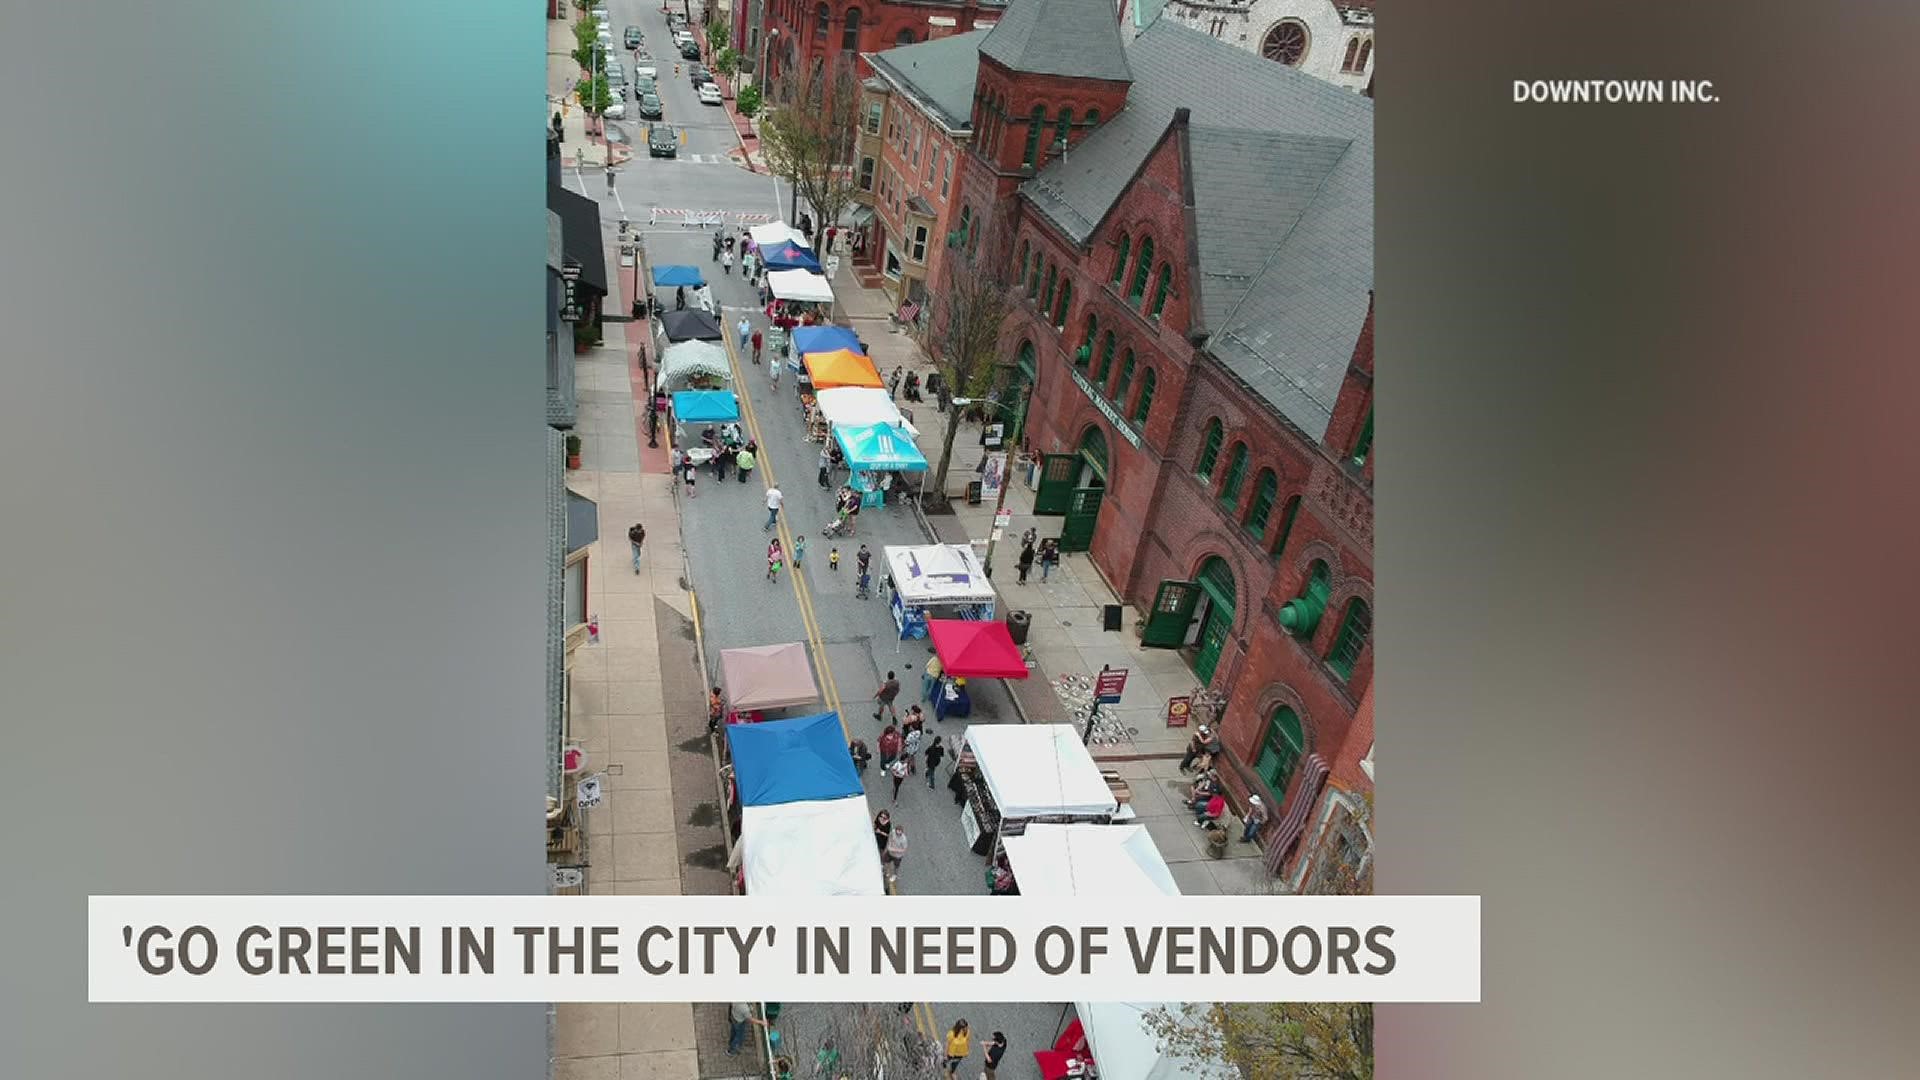 This street fair will feature more than 40 vendors, live music, food, children’s activities, and much more.